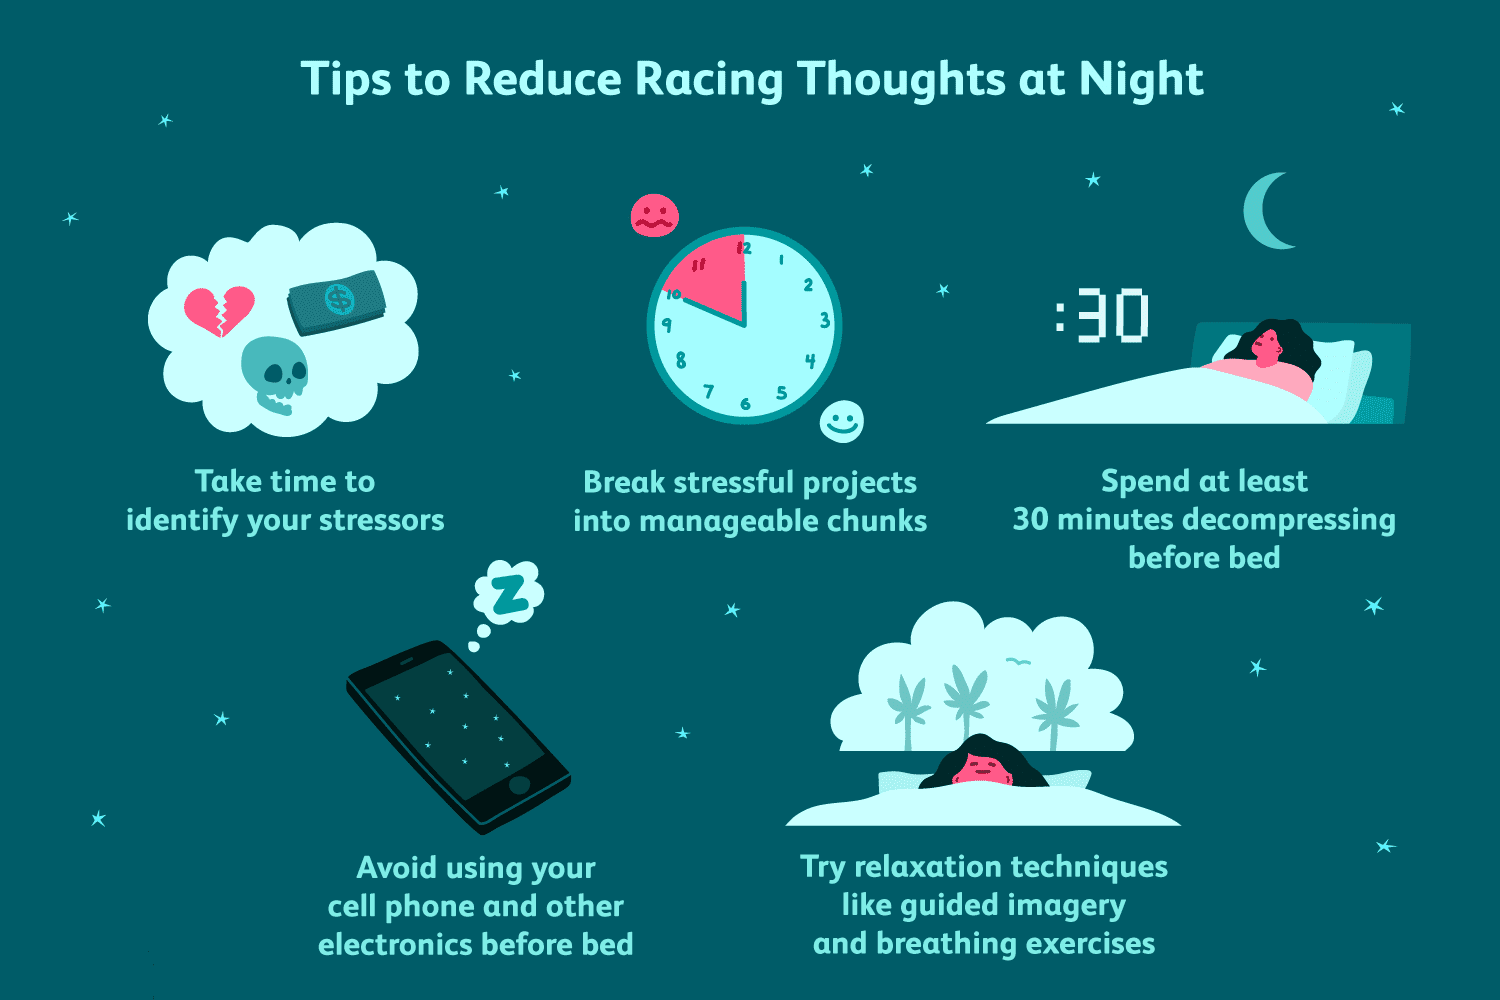 Tips of Reduce Racing Thought at Night